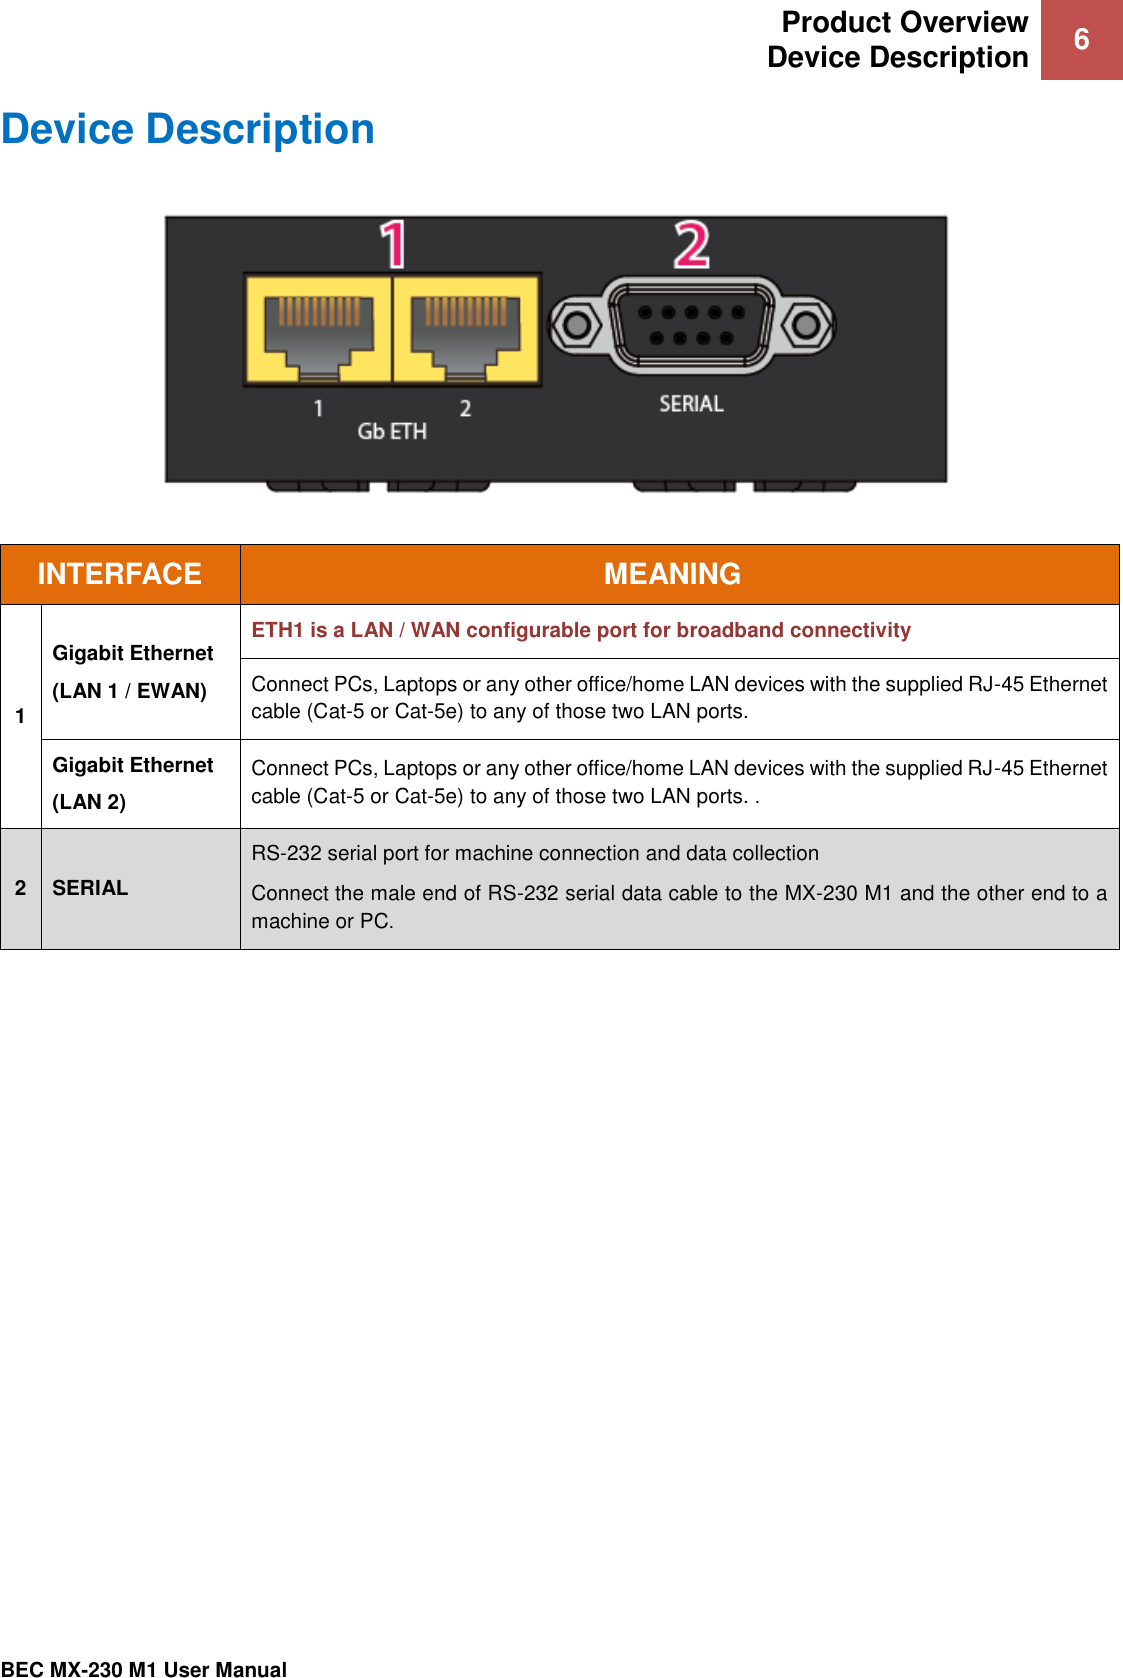 Product Overview Device Description 6   BEC MX-230 M1 User Manual  Device Description    INTERFACE MEANING 1 Gigabit Ethernet (LAN 1 / EWAN) ETH1 is a LAN / WAN configurable port for broadband connectivity Connect PCs, Laptops or any other office/home LAN devices with the supplied RJ-45 Ethernet cable (Cat-5 or Cat-5e) to any of those two LAN ports.  Gigabit Ethernet (LAN 2) Connect PCs, Laptops or any other office/home LAN devices with the supplied RJ-45 Ethernet cable (Cat-5 or Cat-5e) to any of those two LAN ports. . 2 SERIAL  RS-232 serial port for machine connection and data collection Connect the male end of RS-232 serial data cable to the MX-230 M1 and the other end to a machine or PC. 